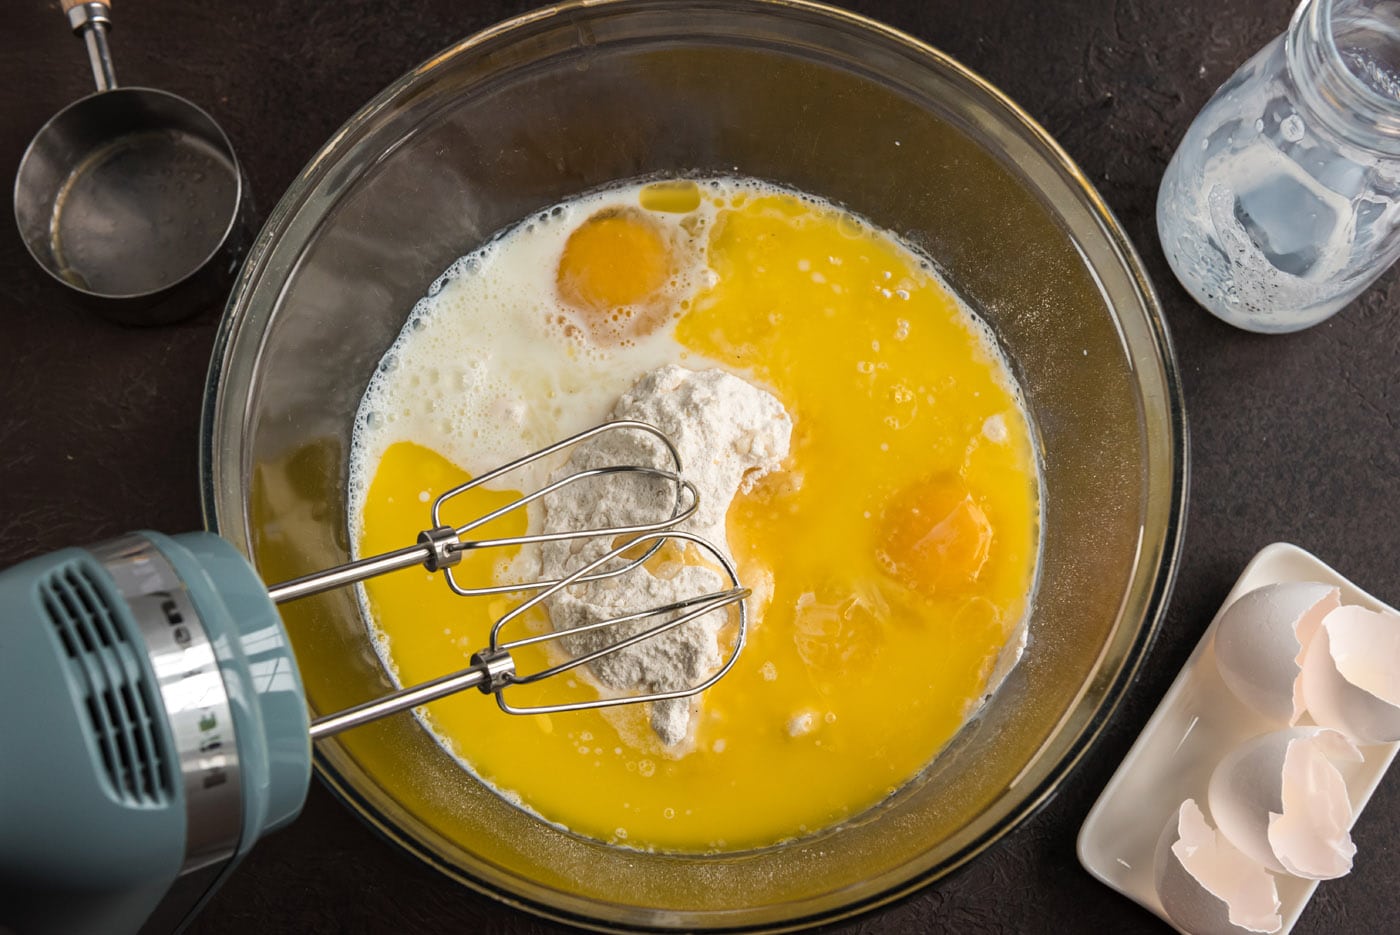 mixing cake mix and ingredients with a hand mixer